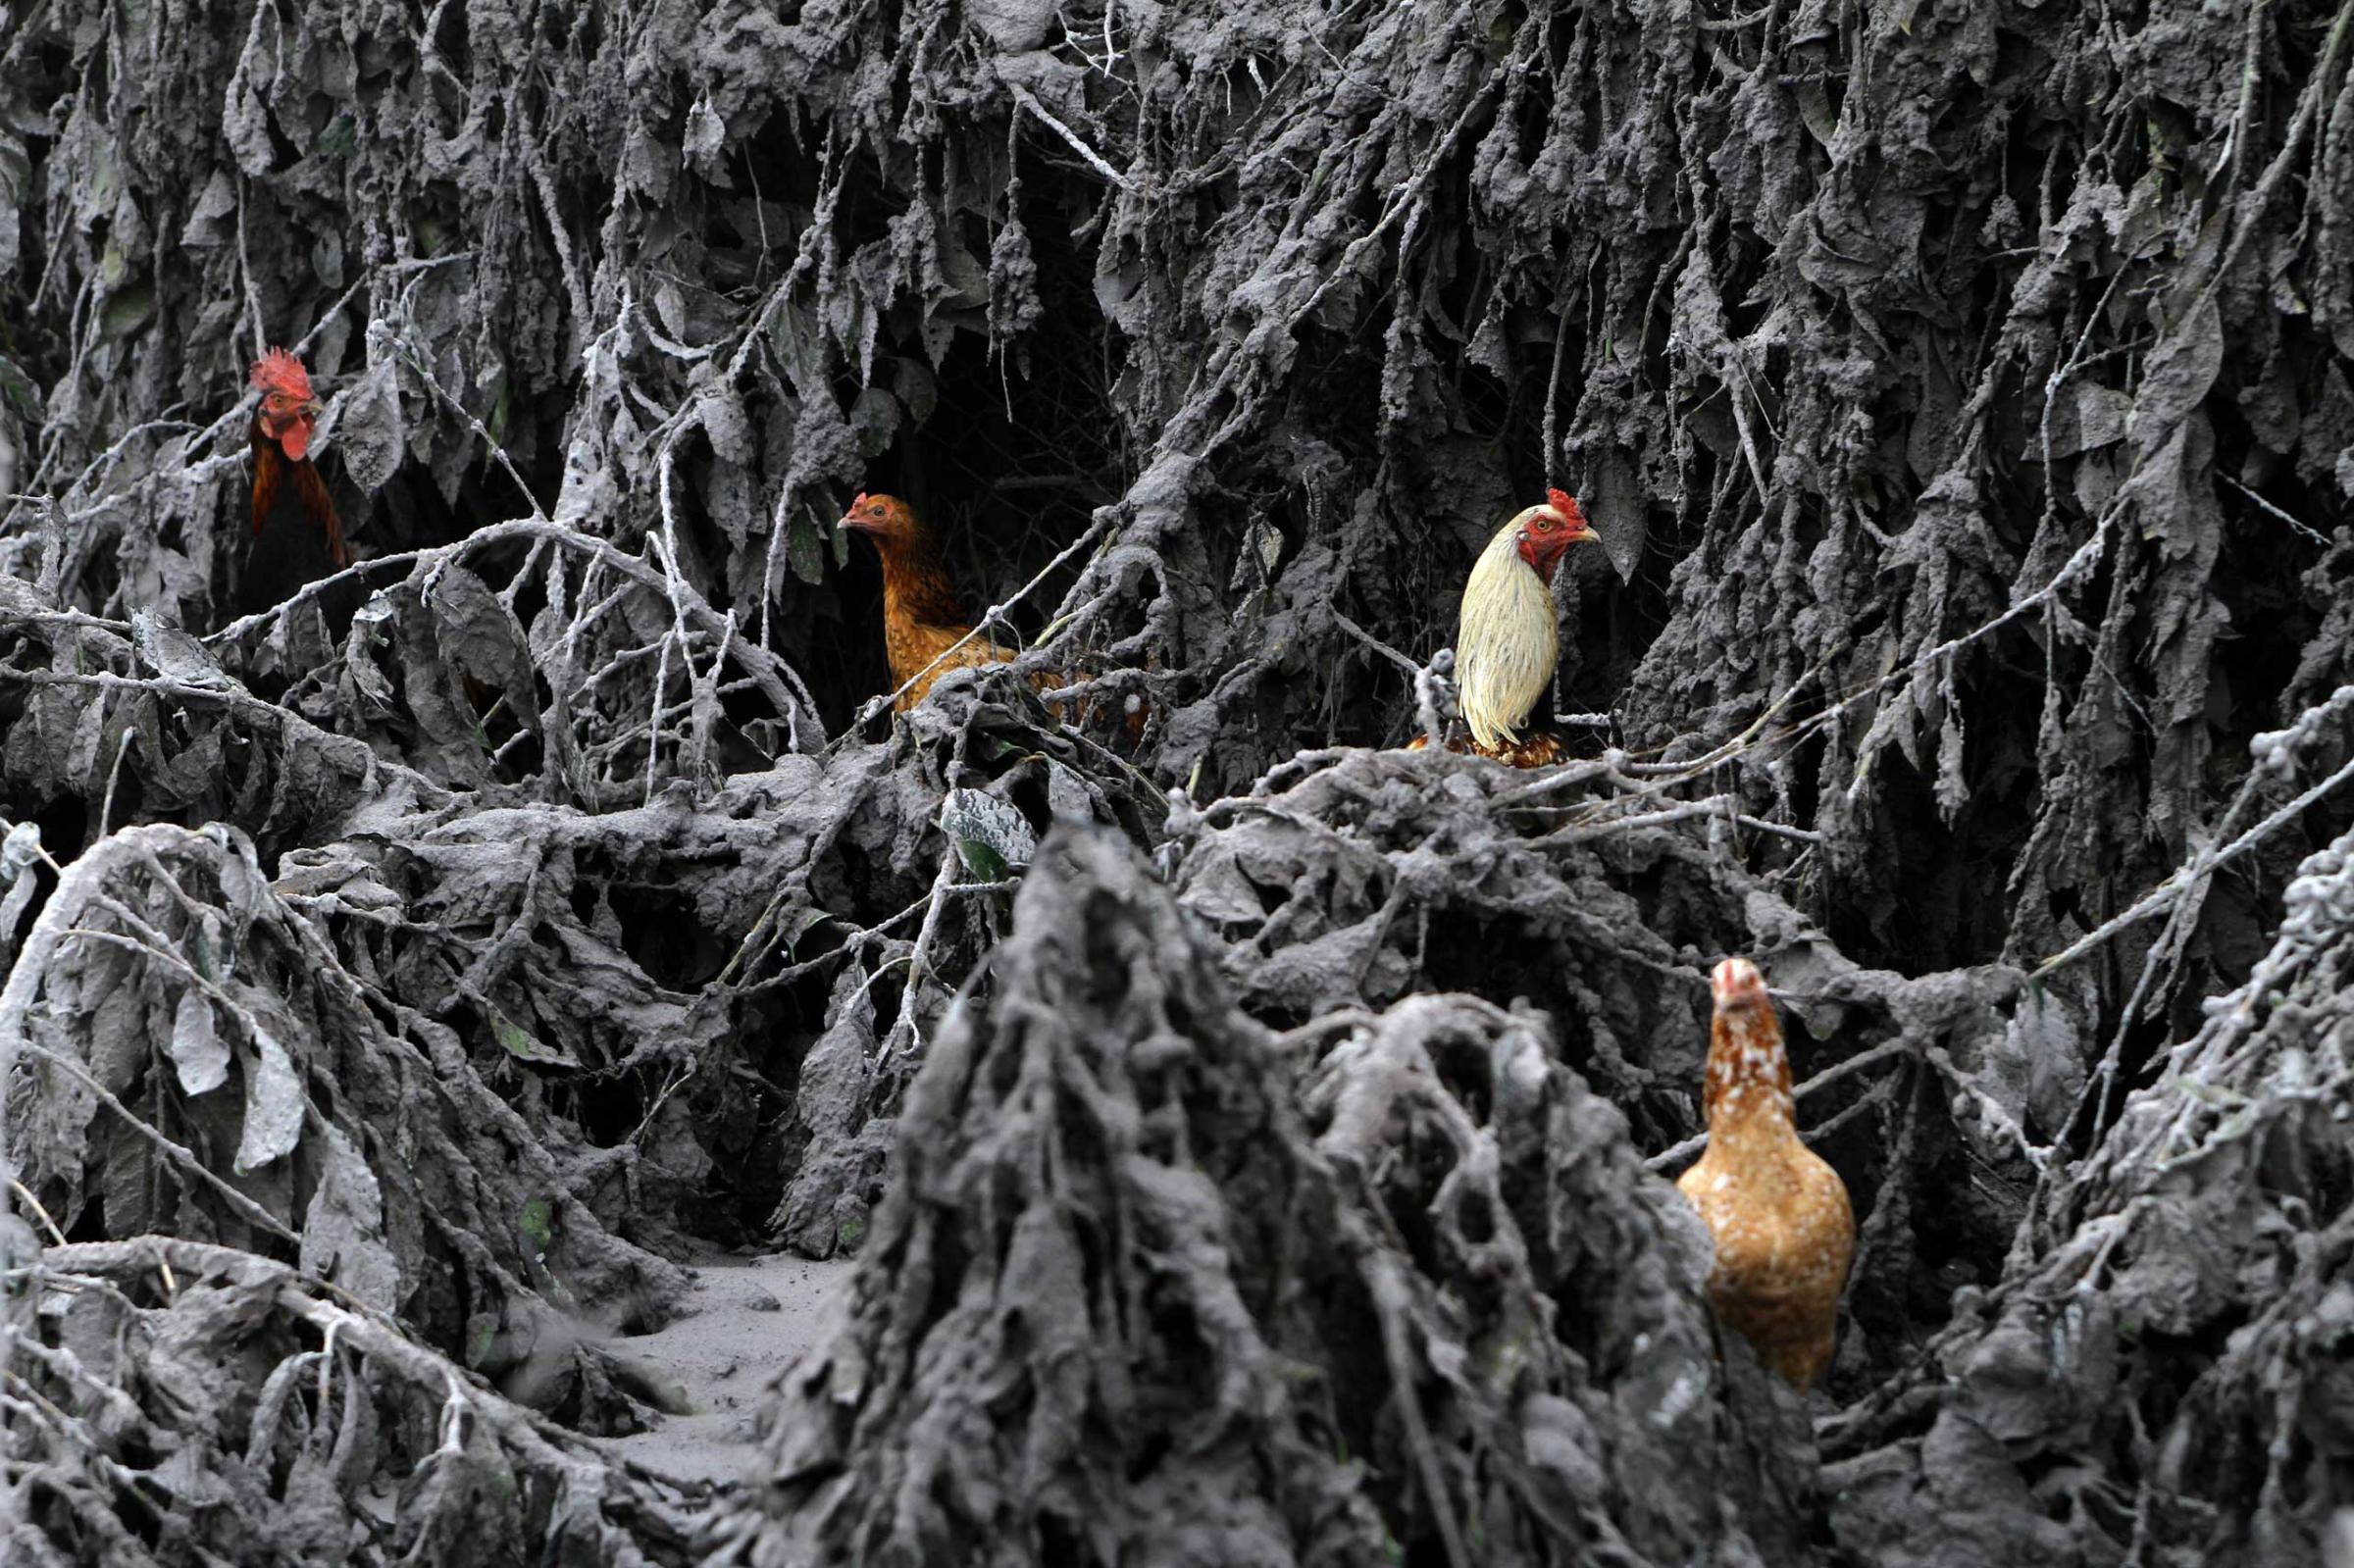 Chickens are seen surrounded by plants covered by ash from Mount Sinabung near Sigarang-Garang village in Karo district, Indonesia's North Sumatra province, Jan. 12, 2014.